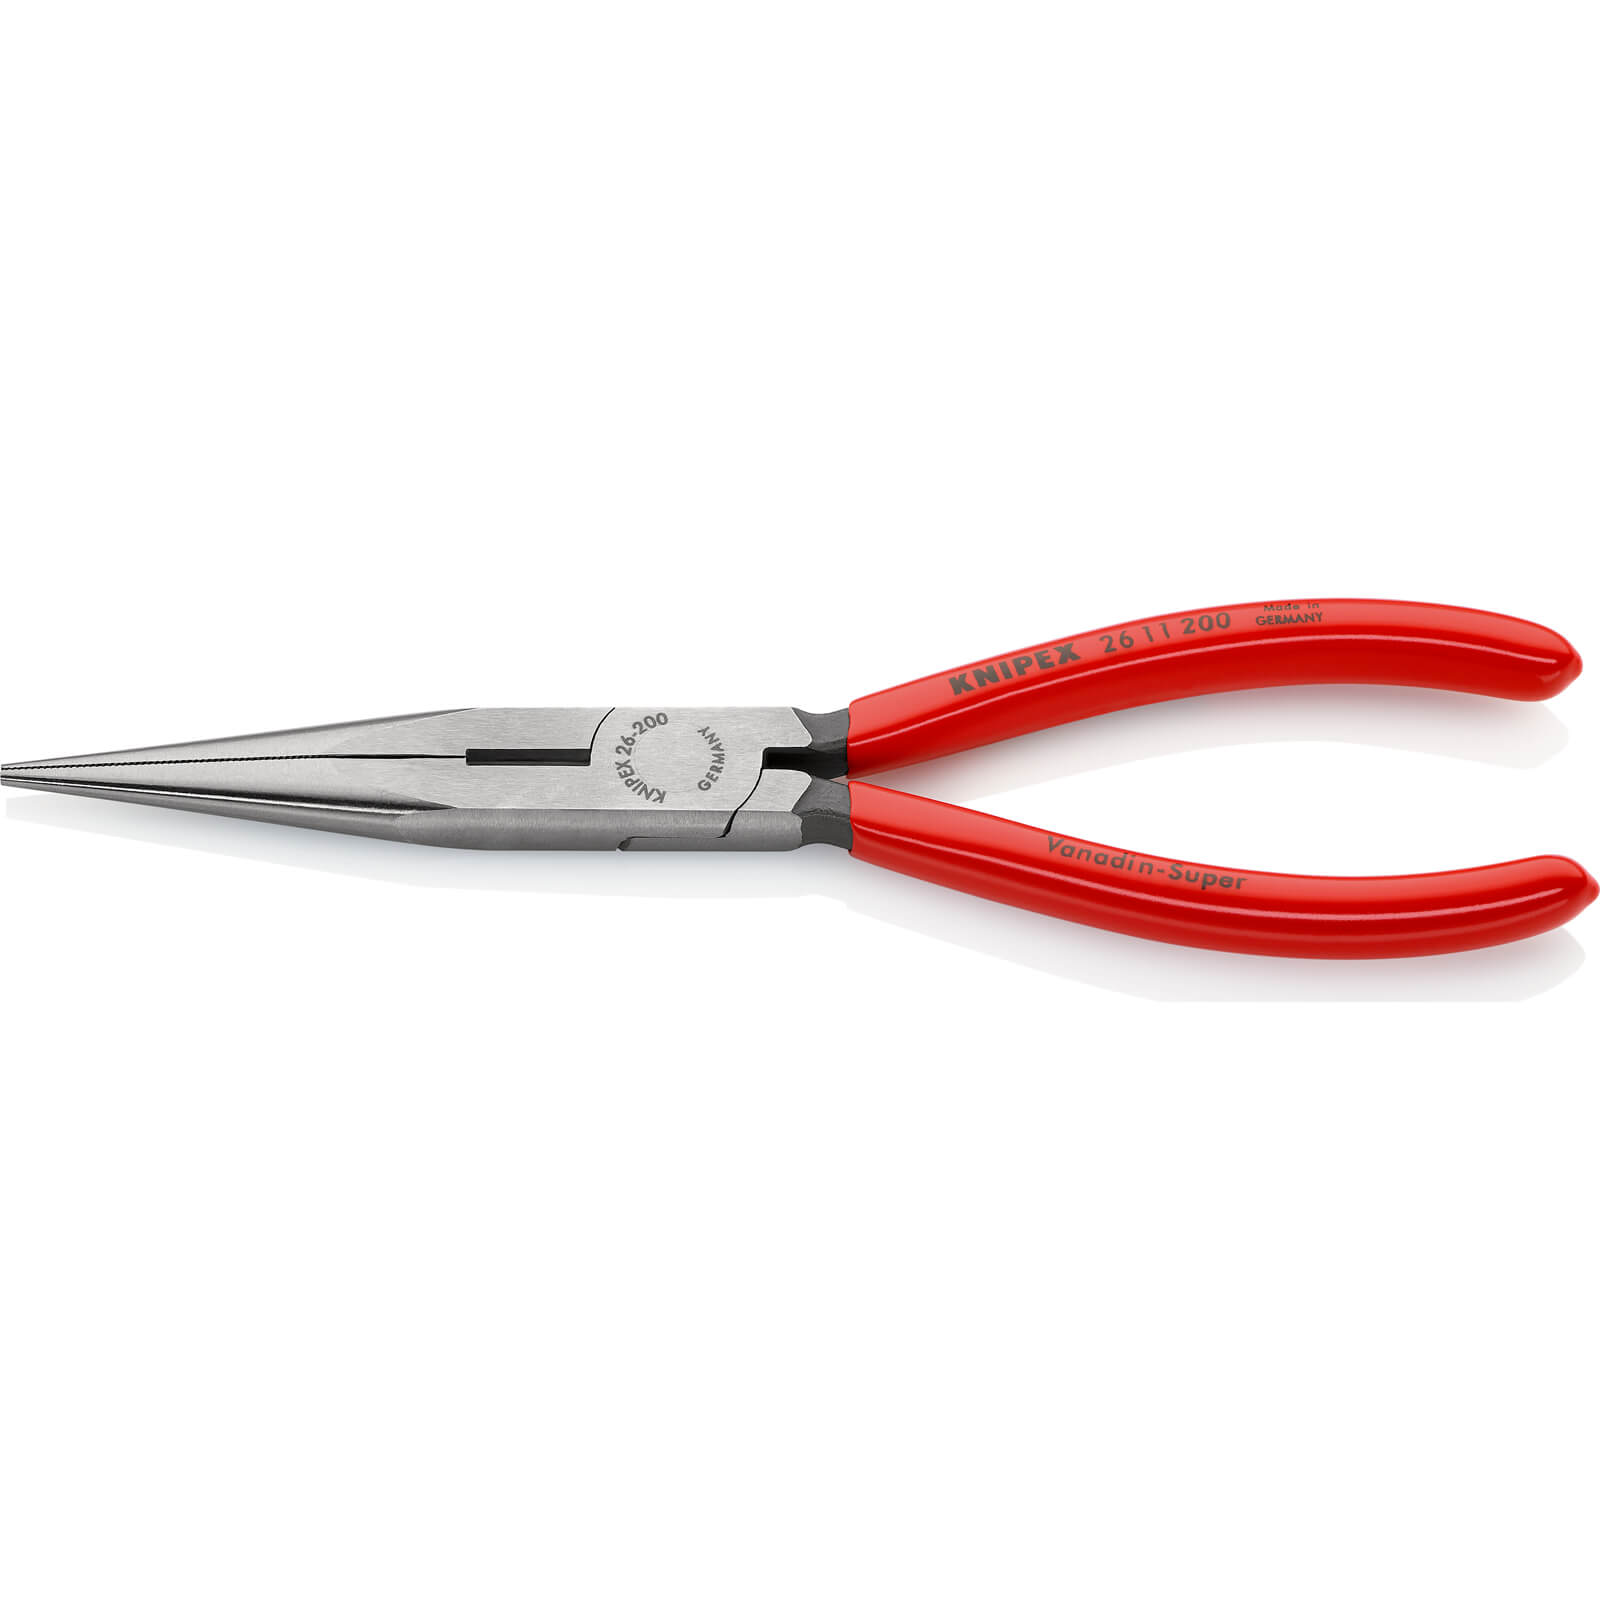 Image of Knipex 26 11 Long Nose Side Cutting Pliers 200mm